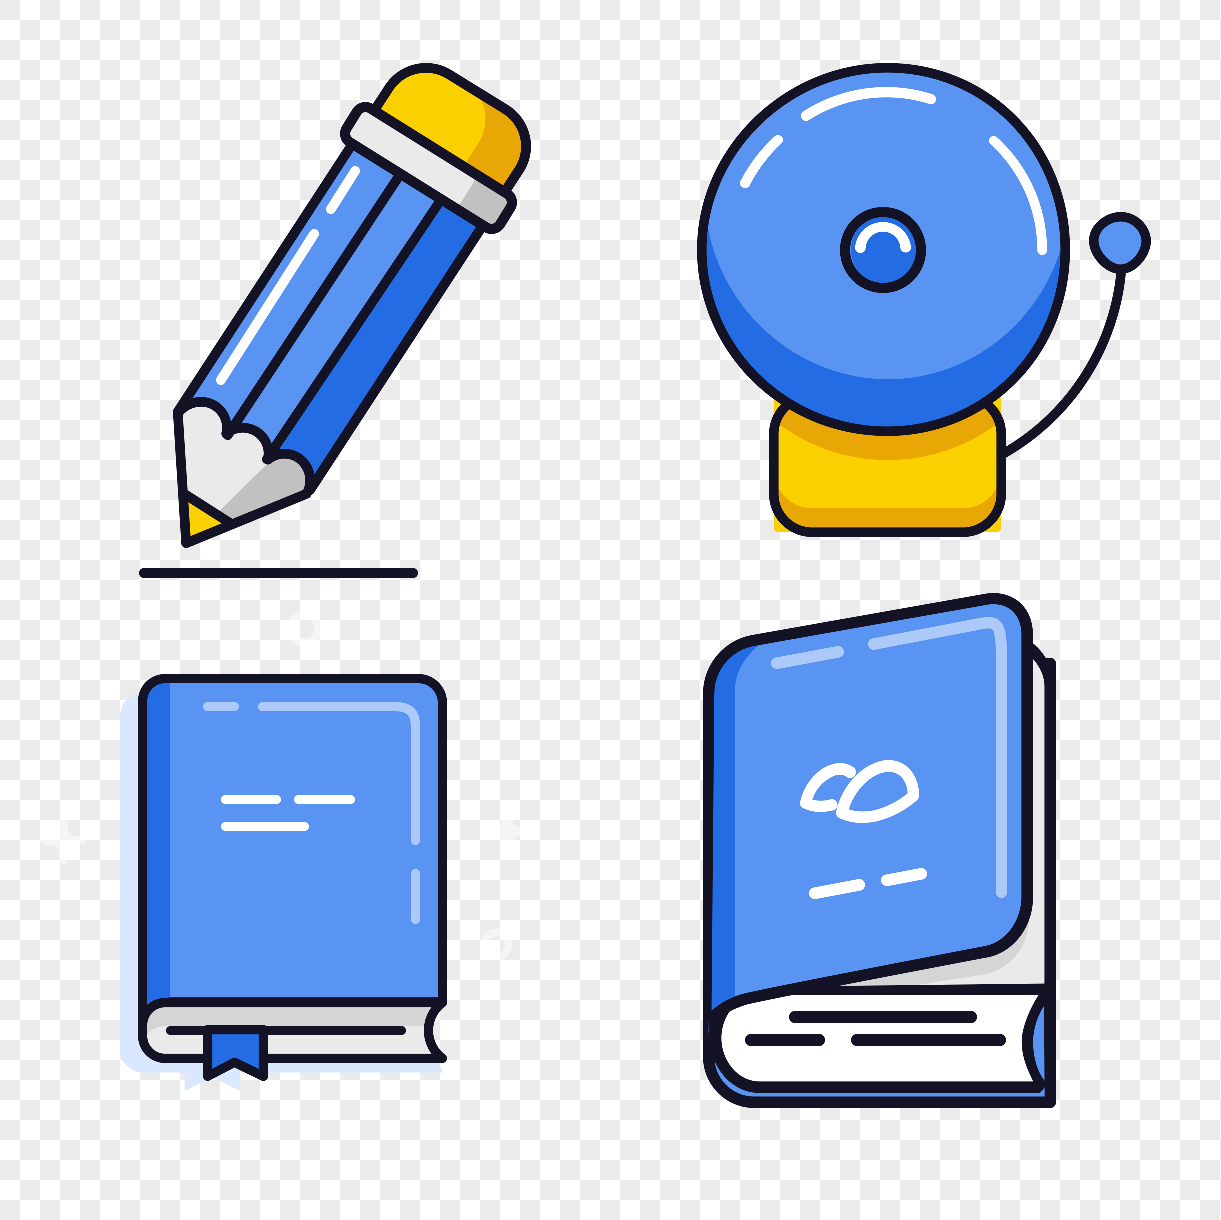 Stationery book icon free vector illustration material, material, book, icon png picture